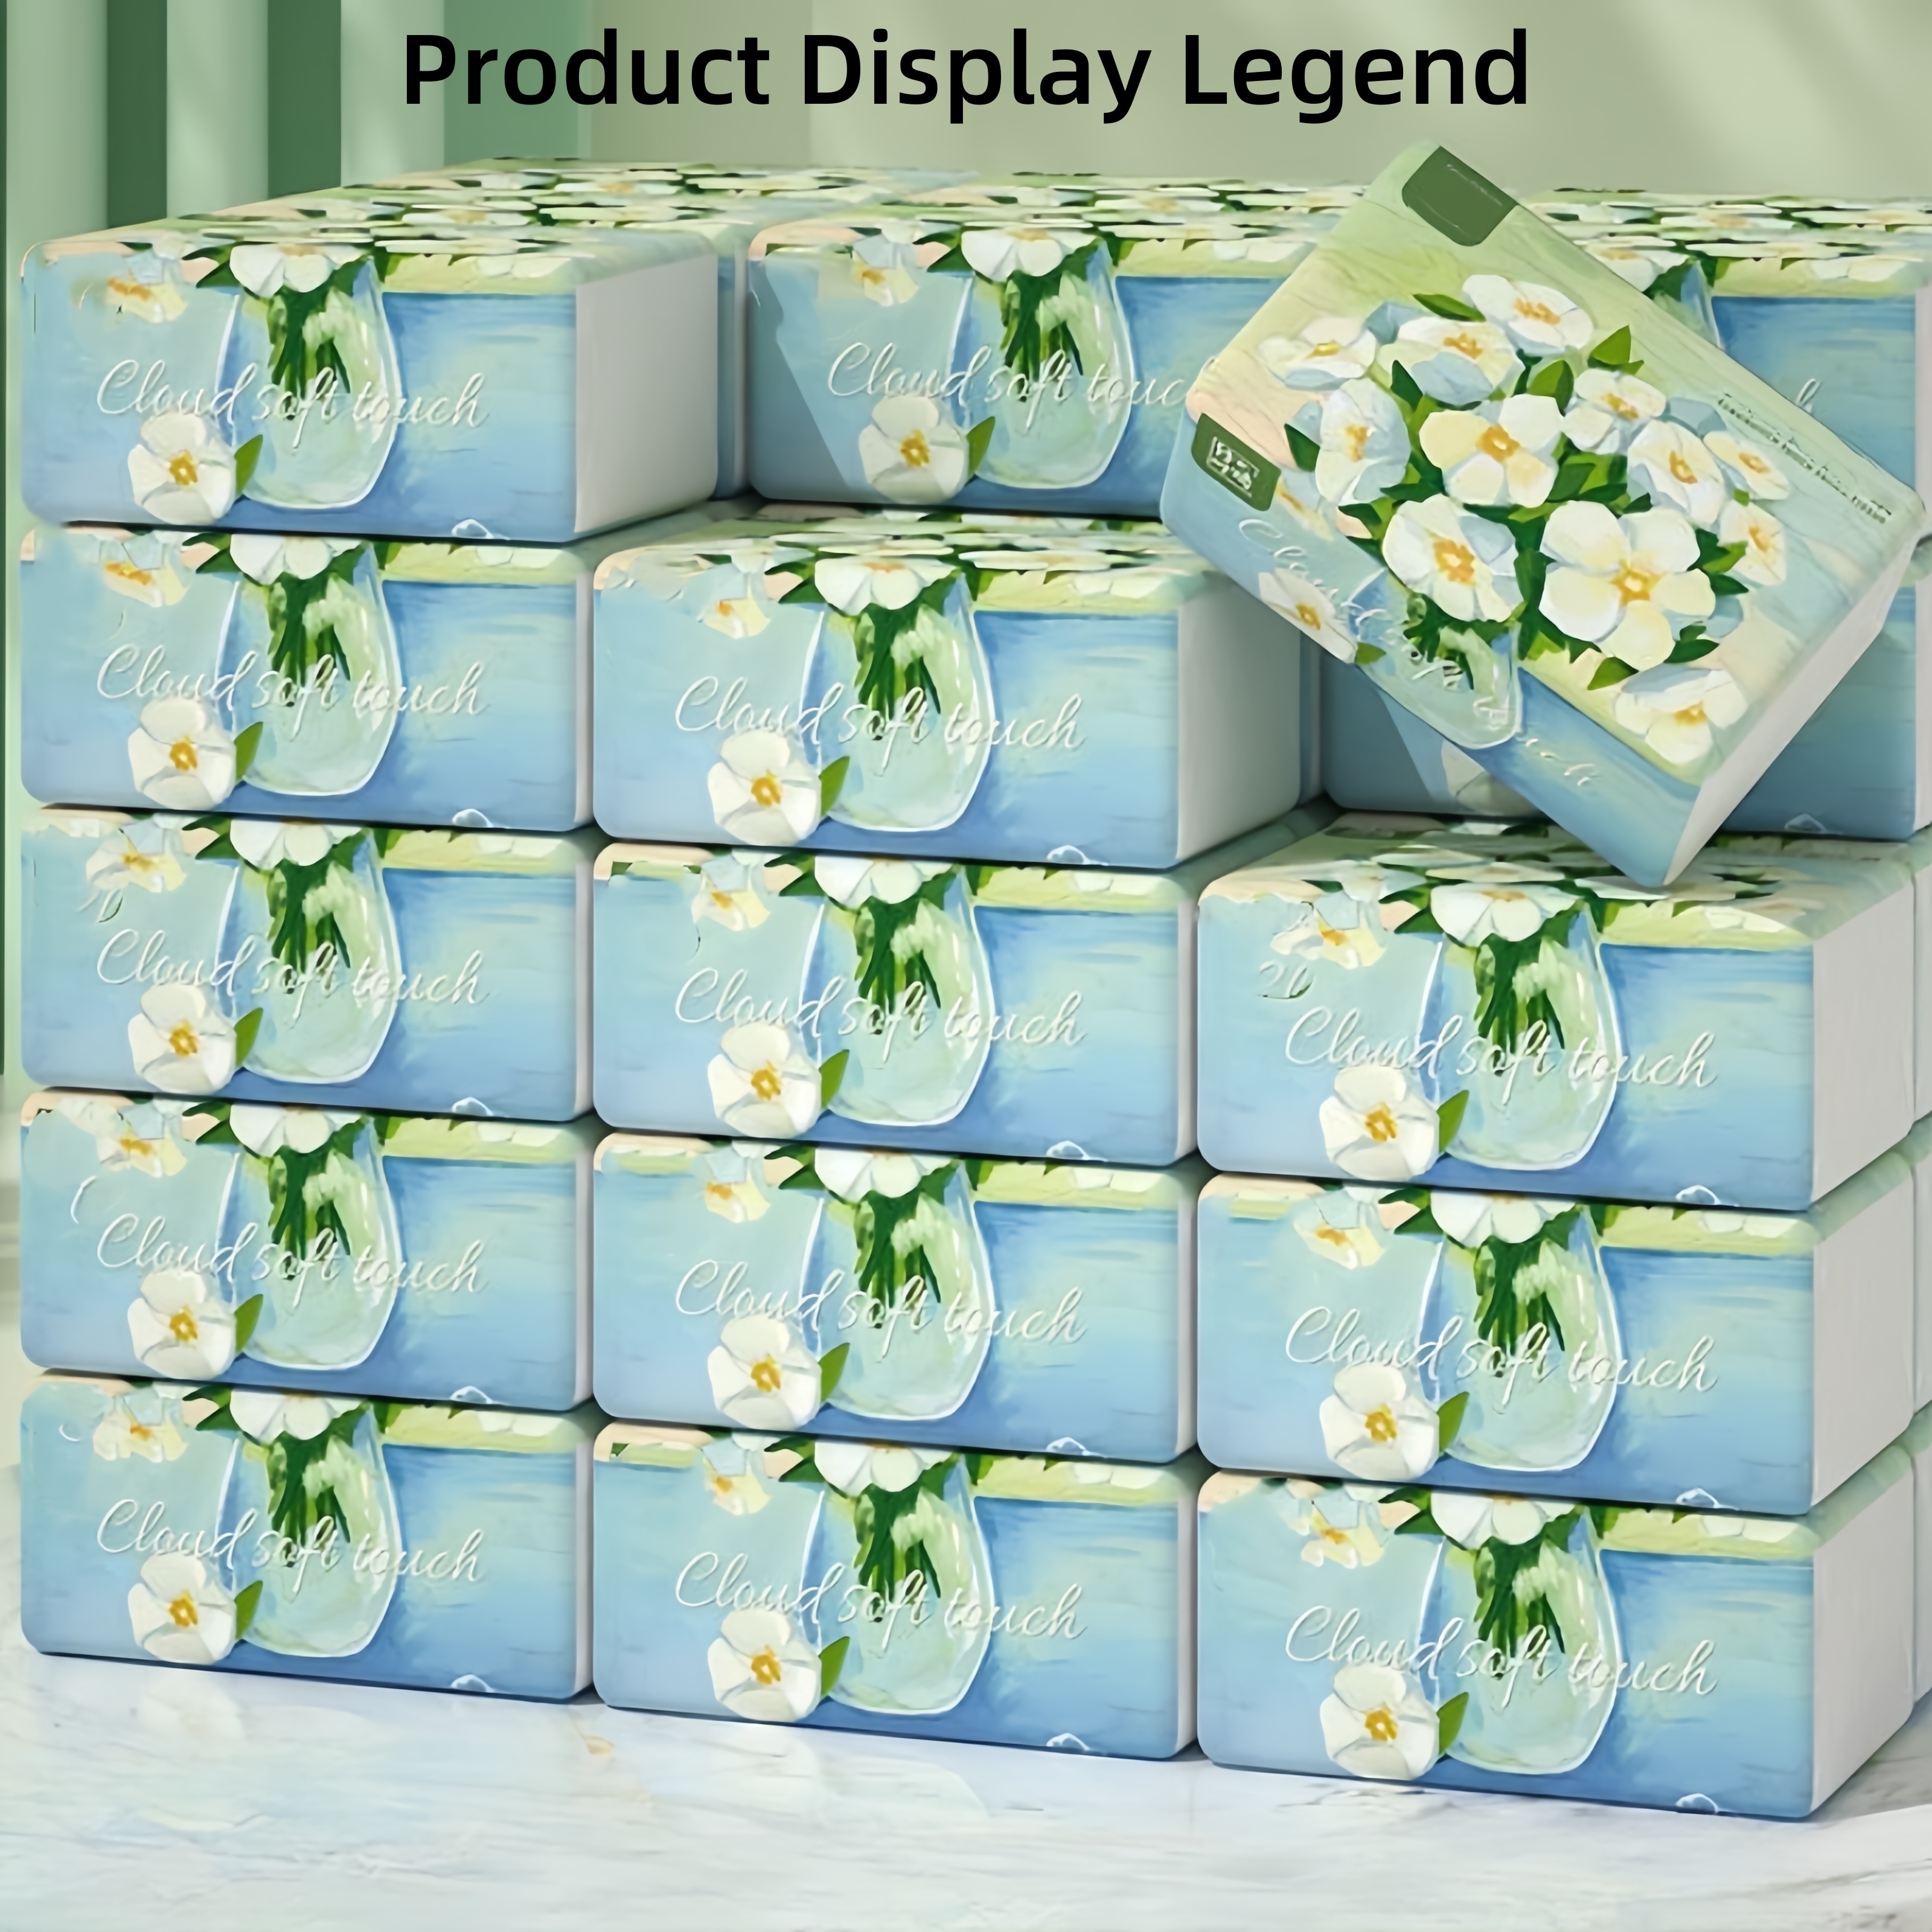 

5-layer Facial Tissues, 320 Sheets/pack, 10 Packs, Tissue Size 17 Cm*14 Cm, Soft Facial Tissues For Hotel And Home Use